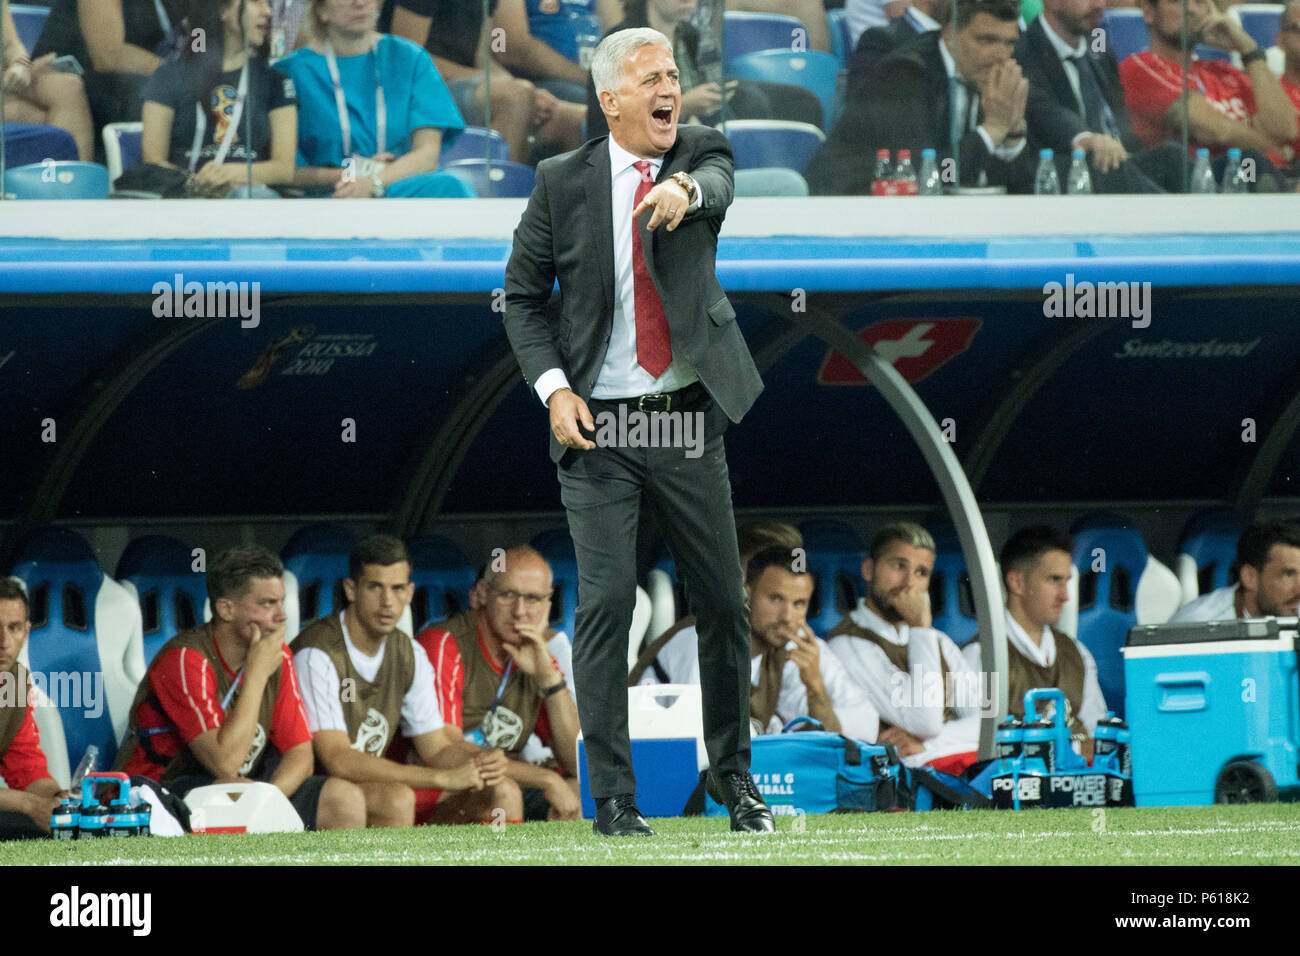 Vladimir PETKOVIC (coach, SUI) gives instruction, instructions, whole figure, shouts, shouts, calling, Switzerland (SUI) - Costa Rica (CRC) 2: 2, preliminary round, group E, game 43, on 27.06.2018 in Nizhni Novgorod; Football World Cup 2018 in Russia from 14.06. - 15.07.2018. | usage worldwide Stock Photo